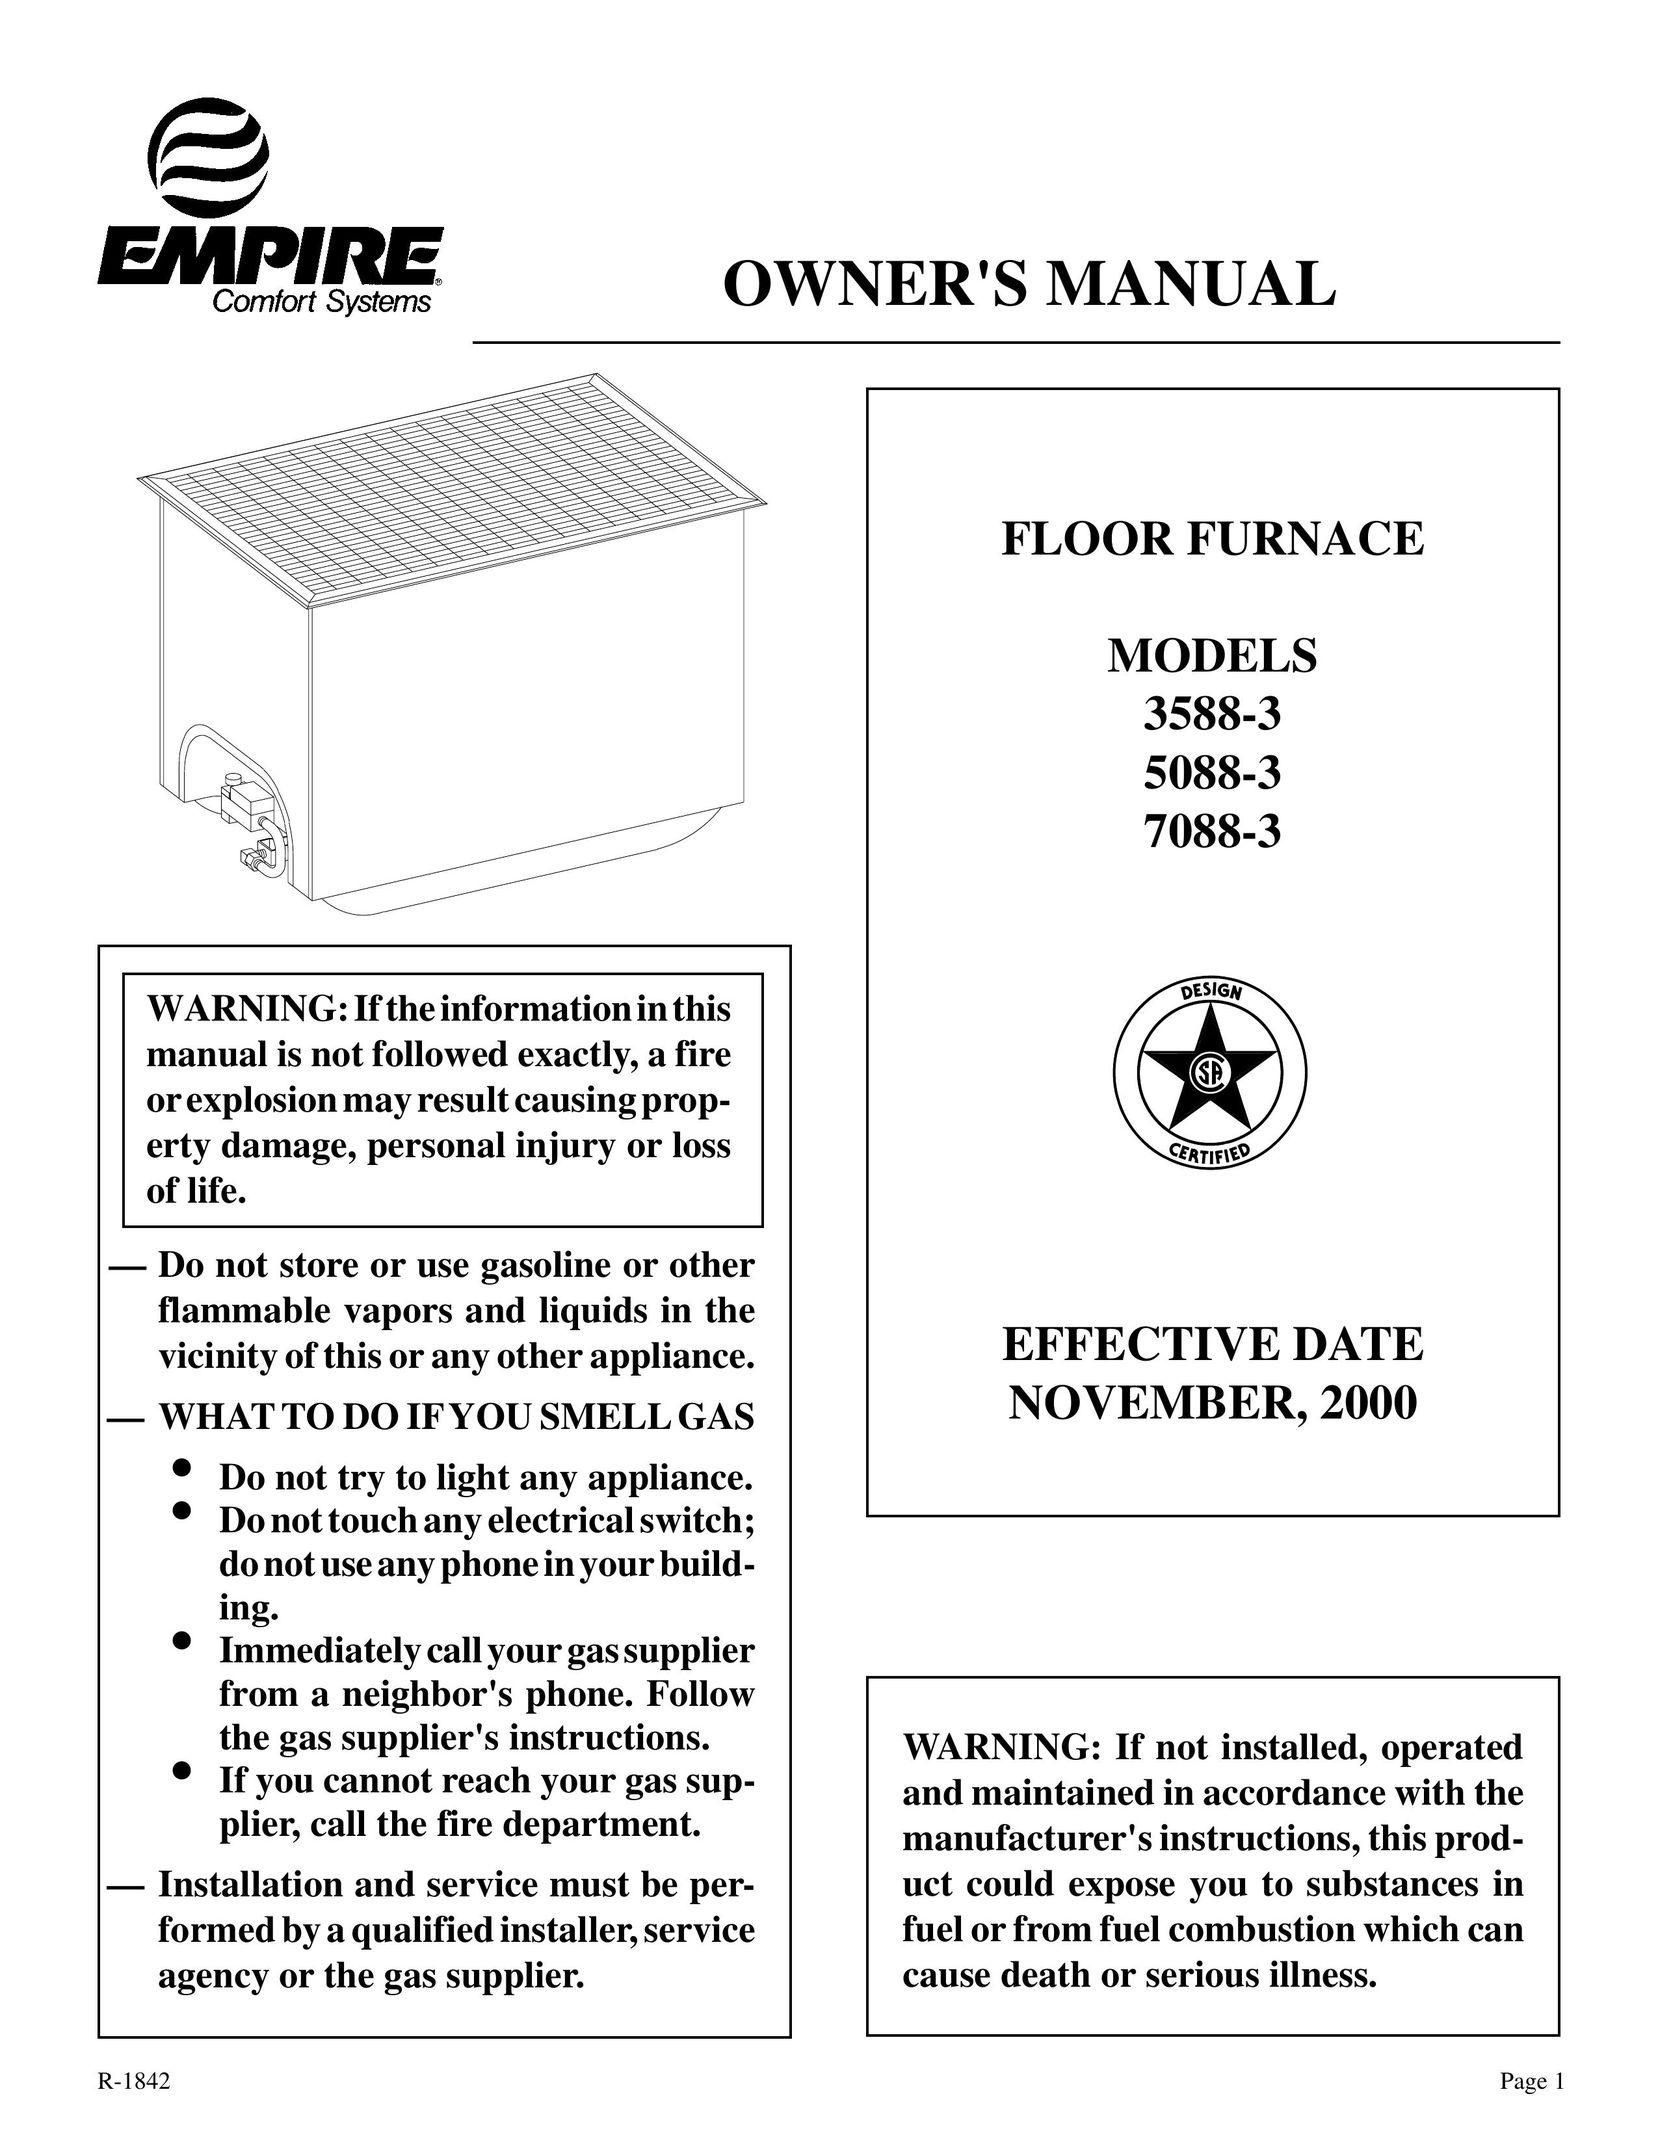 Empire Comfort Systems 5088-3 Furnace User Manual